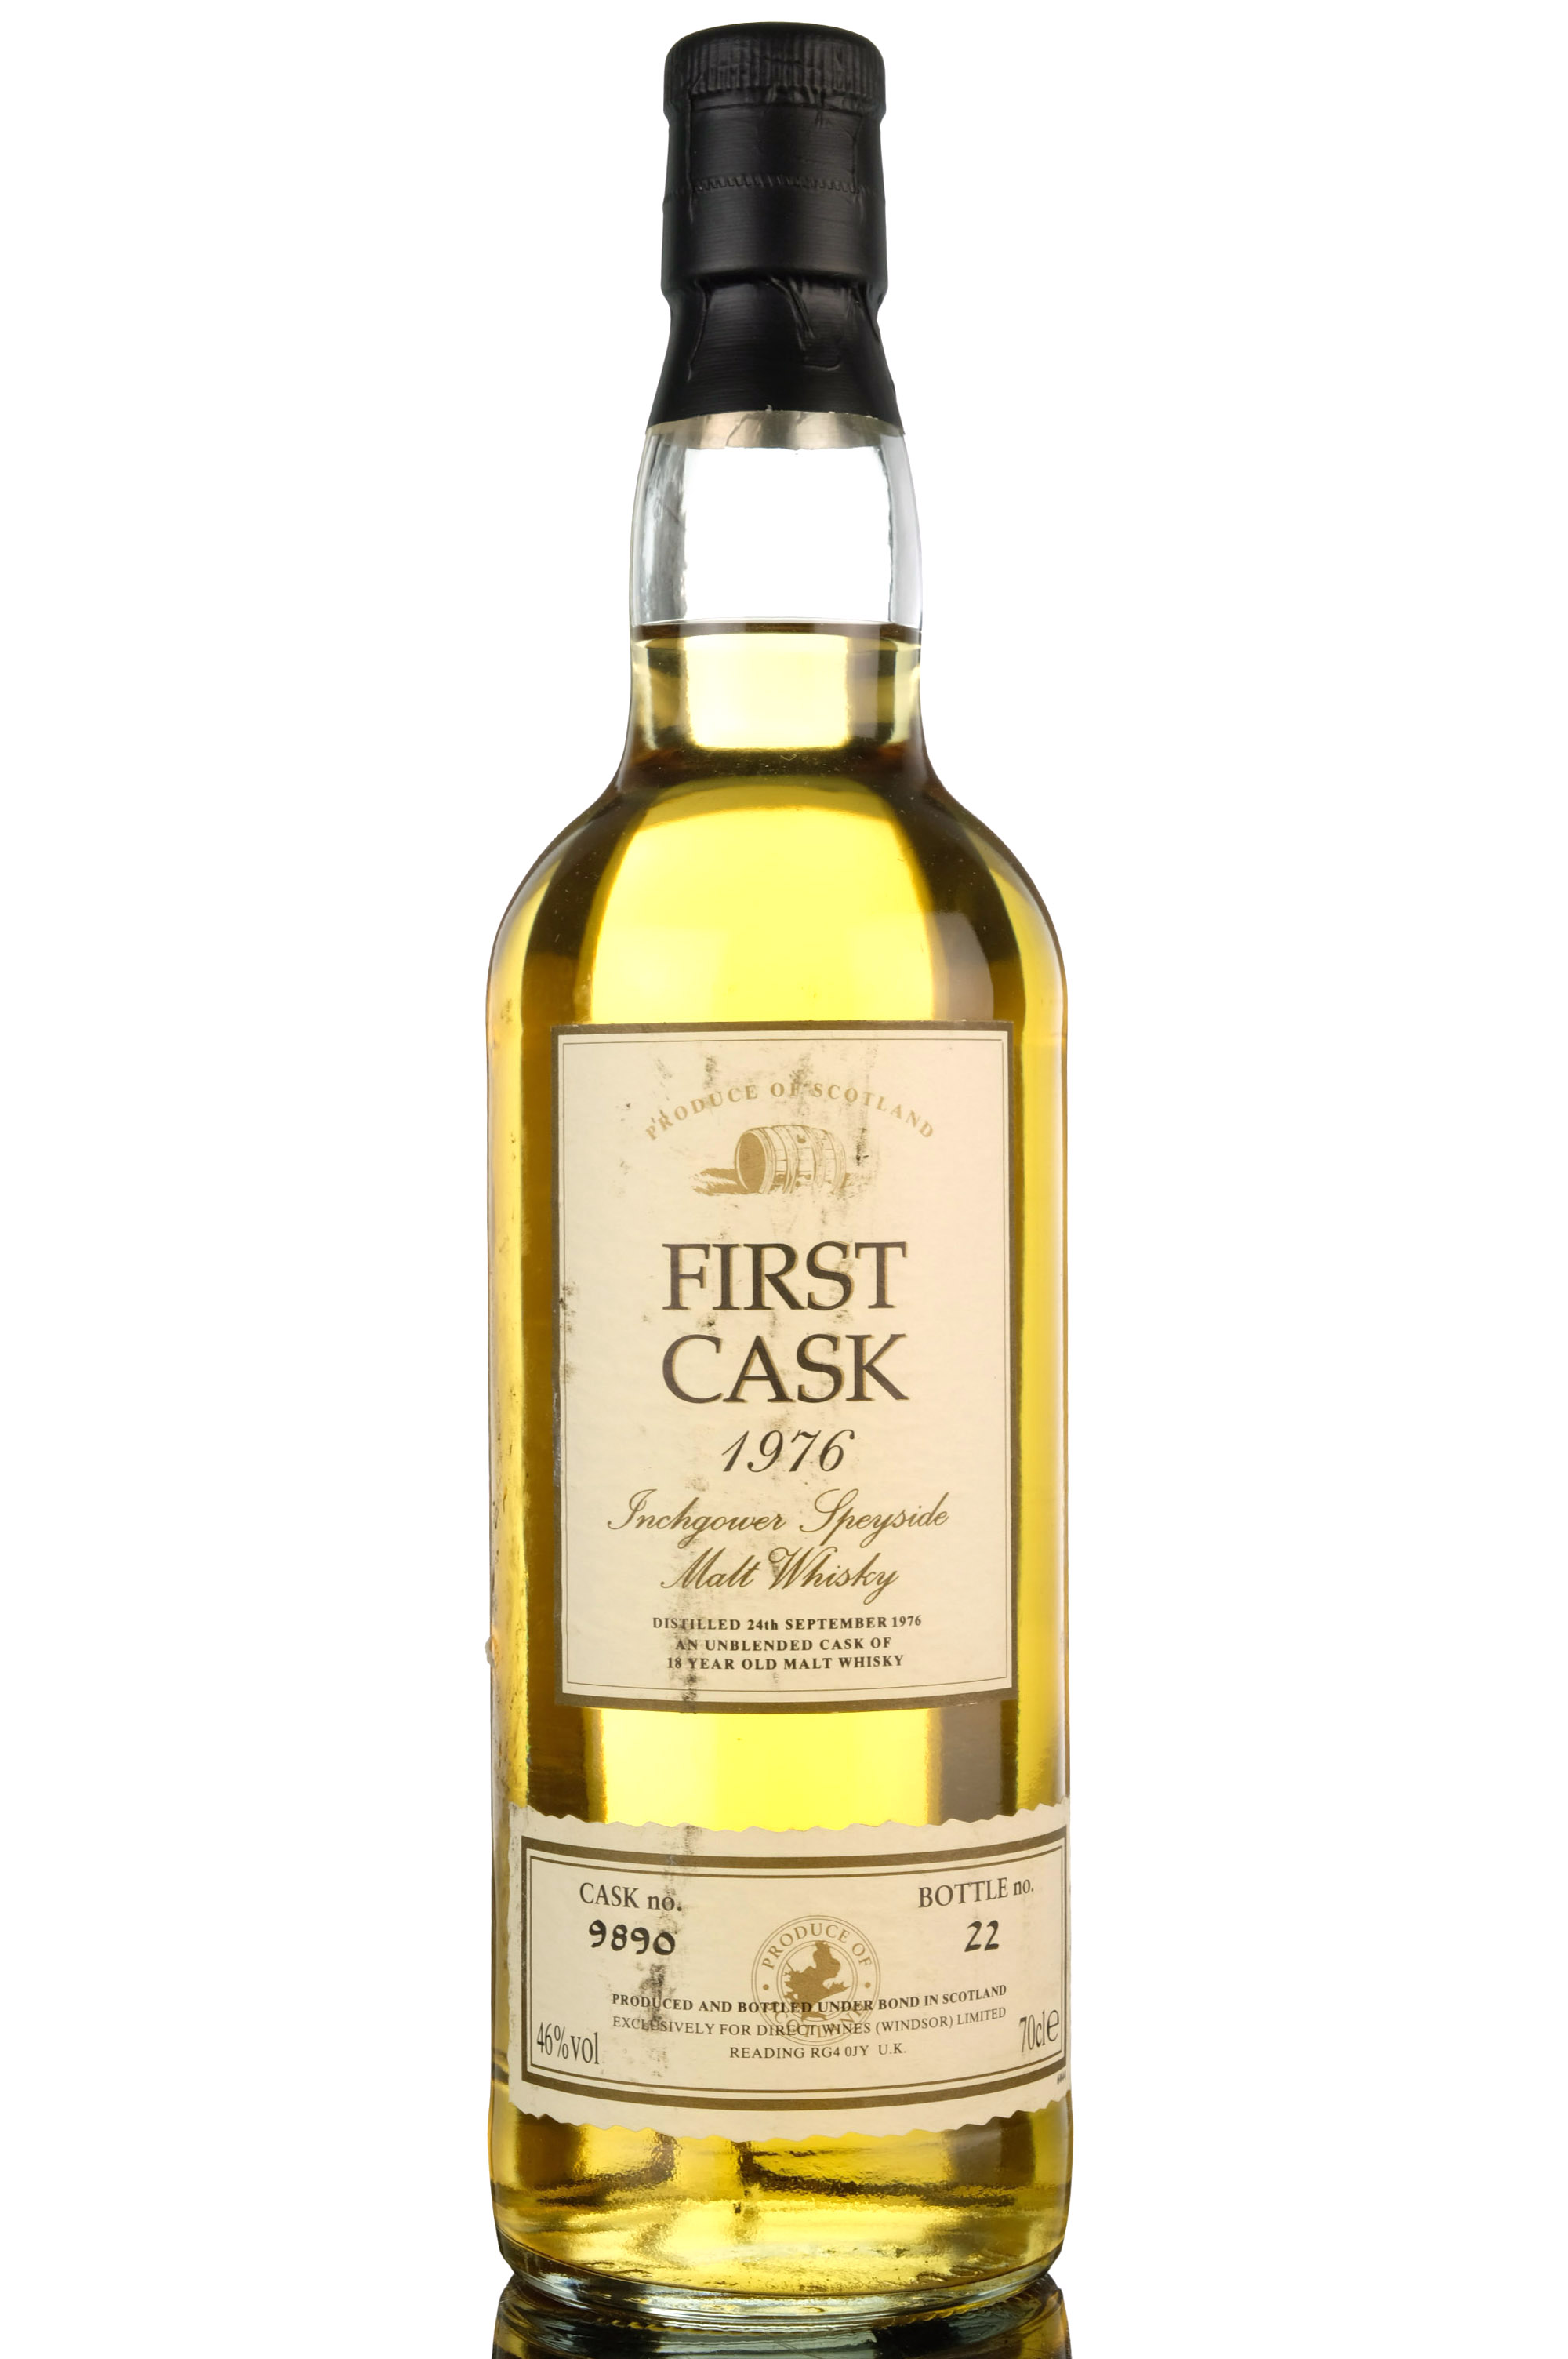 Inchgower 1976 - 18 Year Old - First Cask - Single Cask 9890